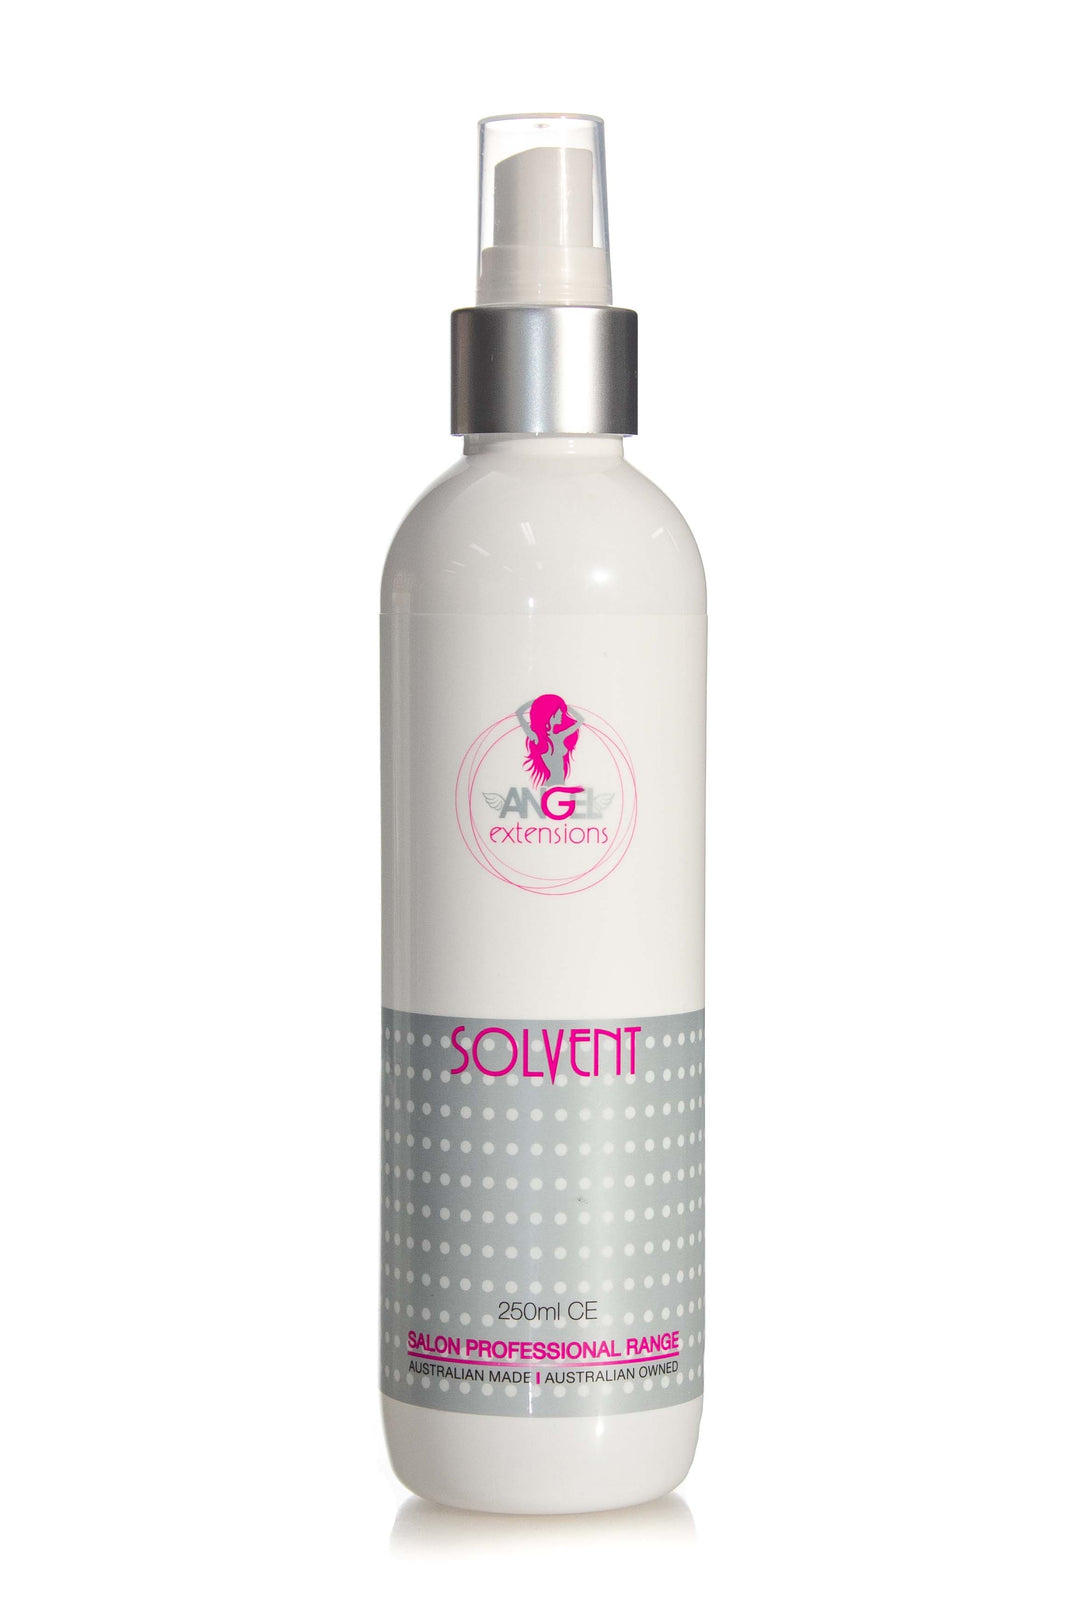 ANGEL EXTENSIONS SOLVENT 250ML